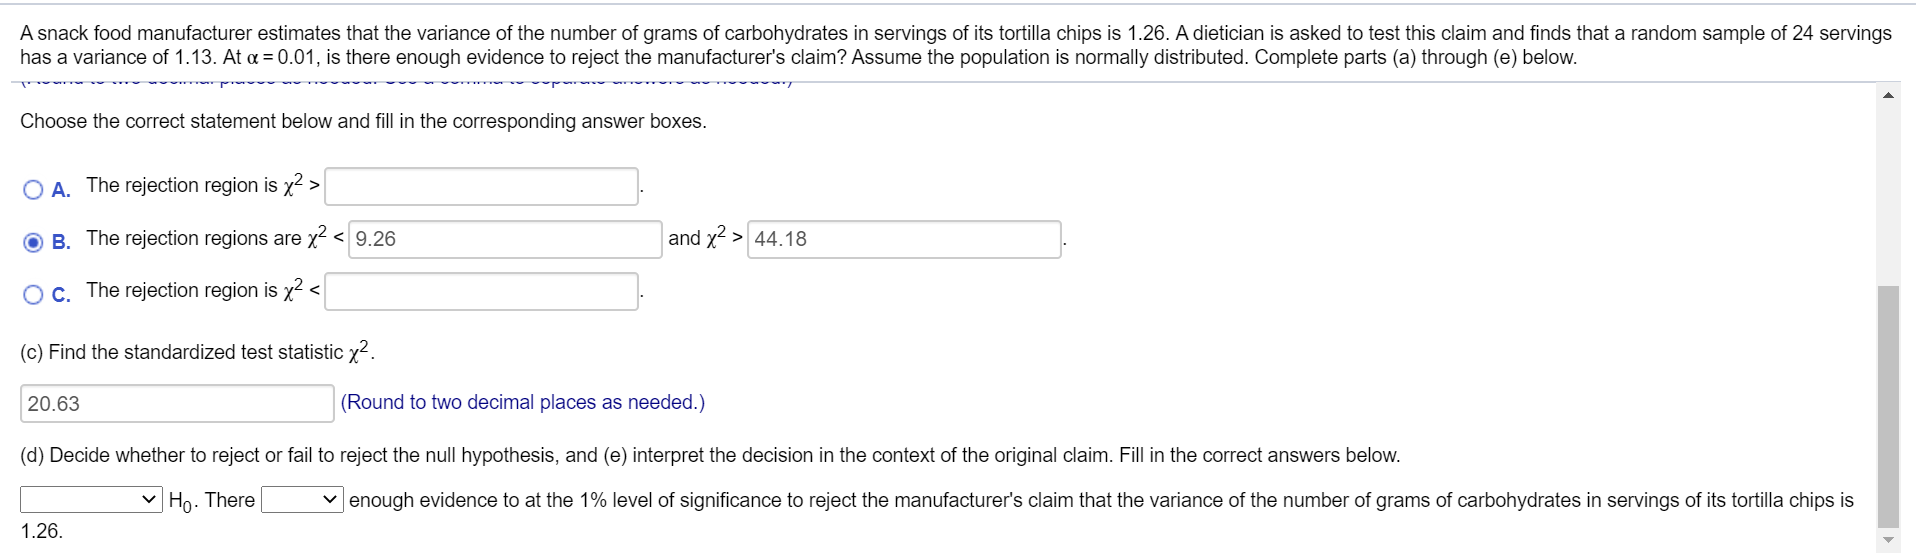 A snack food manufacturer estimates that the variance of the number of grams of carbohydrates in servings of its tortilla chips is 1.26. A dietician is asked to test this claim and finds that a random sample of 24 servings
has a variance of 1.13. At a = 0.01, is there enough evidence to reject the manufacturer's claim? Assume the population is normally distributed. Complete parts (a) through (e) below.
Choose the correct statement below and fill in the corresponding answer boxes.
O A. The rejection region is x2 >
B. The rejection regions are x² < 9.26
and x2 > 44.18
Oc. The rejection region is x² <
(c) Find the standardized test statistic x2.
20.63
(Round to two decimal places as needed.)
(d) Decide whether to reject or fail to reject the null hypothesis, and (e) interpret the decision in the context of the original claim. Fill in the correct answers below.
| Ho . There
v enough evidence to at the 1% level of significance to reject the manufacturer's claim that the variance of the number of grams of carbohydrates in servings of its tortilla chips is
1.26.
